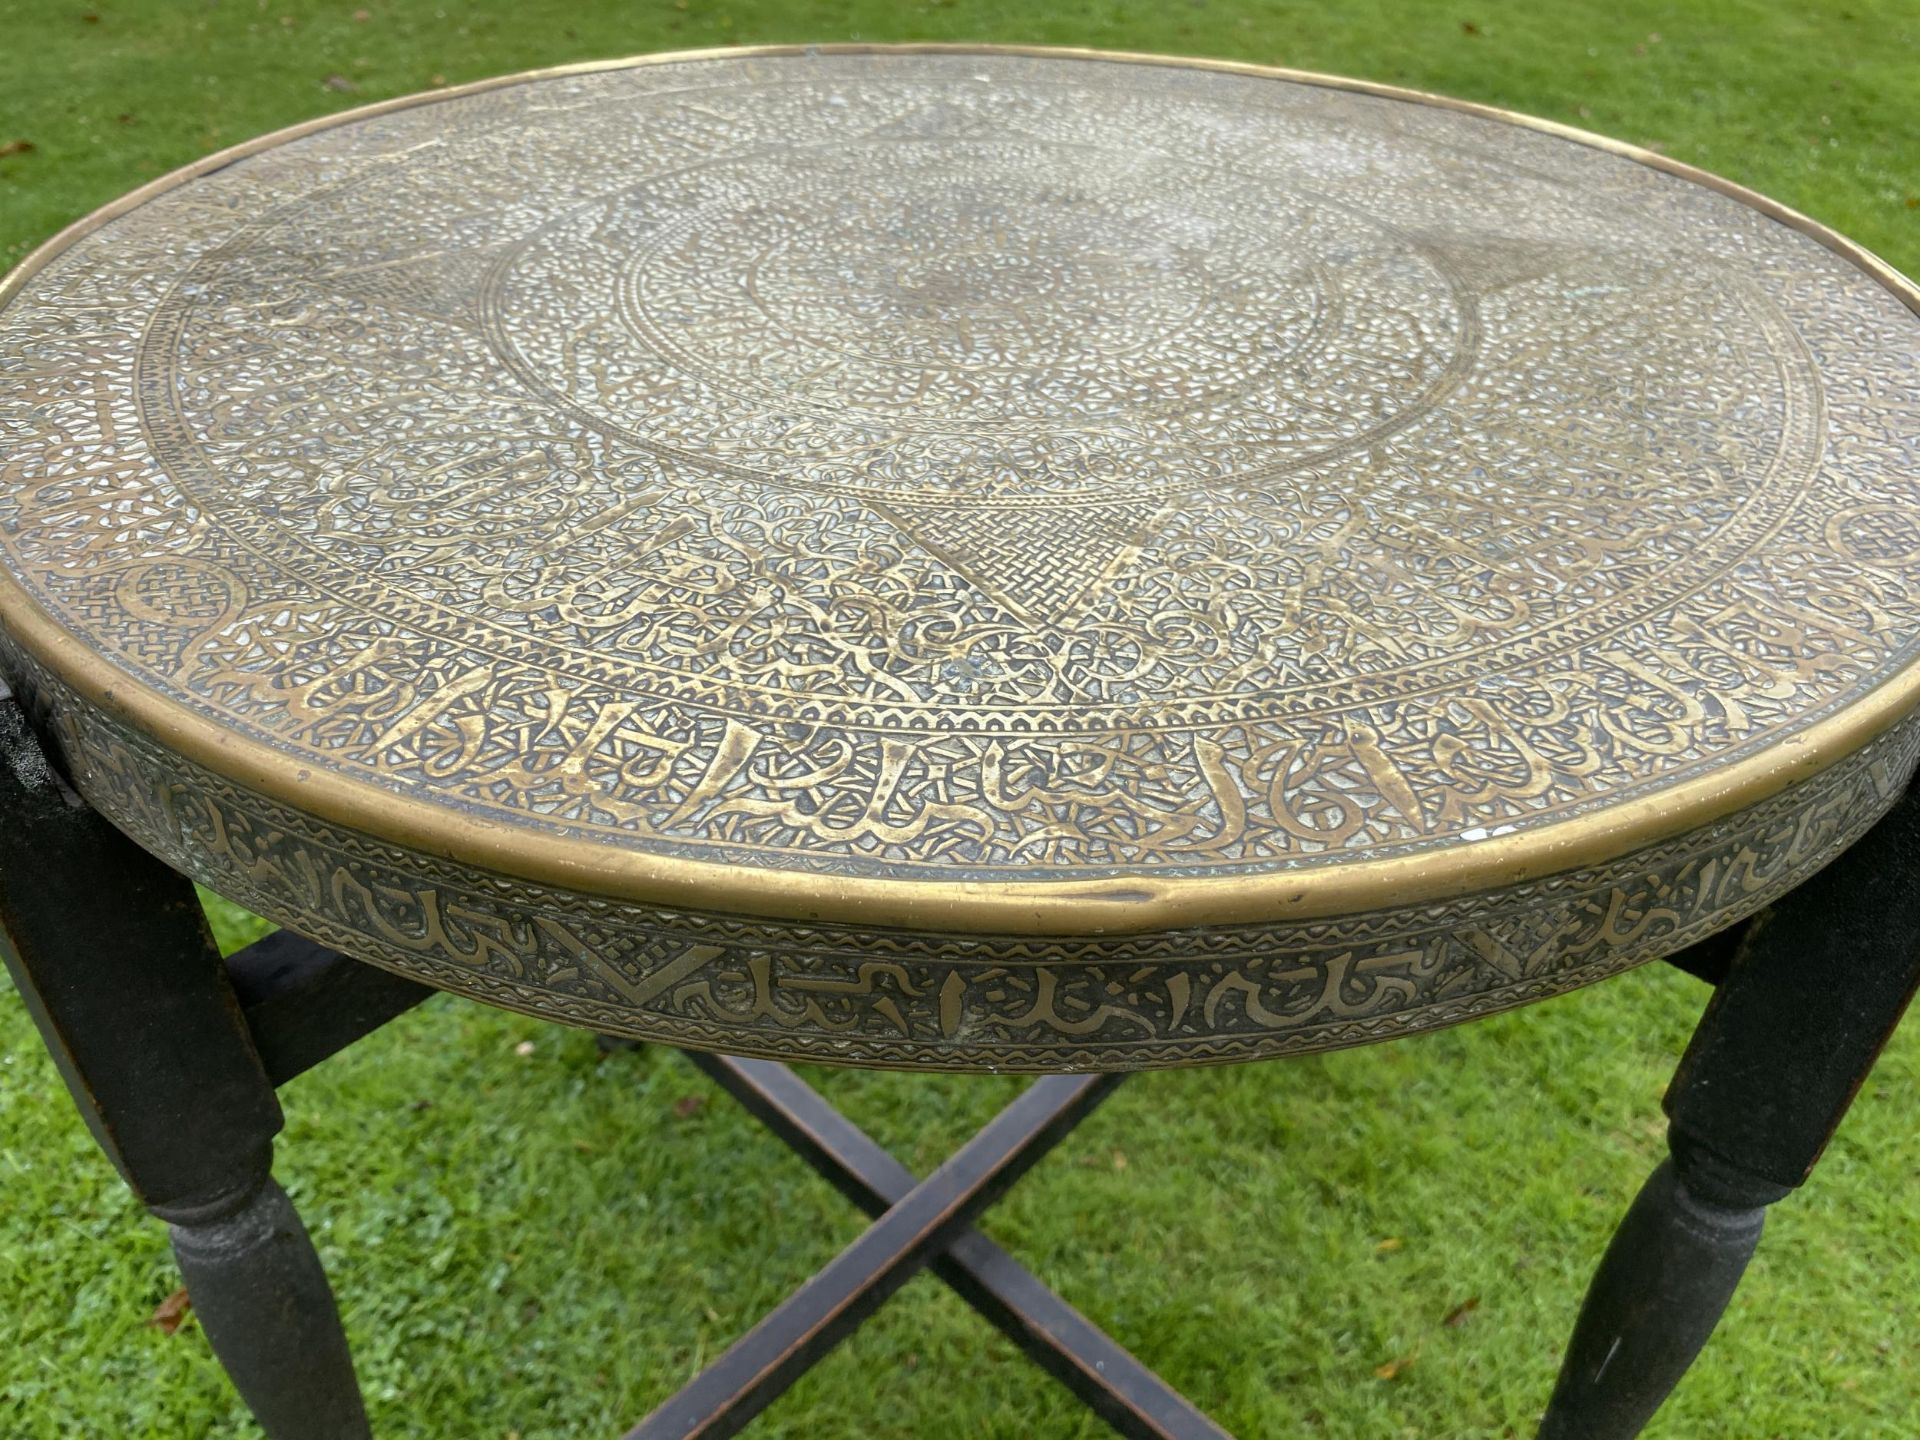 A MIDDLE EASTERN BRASS CIRCULAR TOPPED TABLE ON FOLDING WOODEN BASE, DIAMETER 59CM - Image 2 of 4